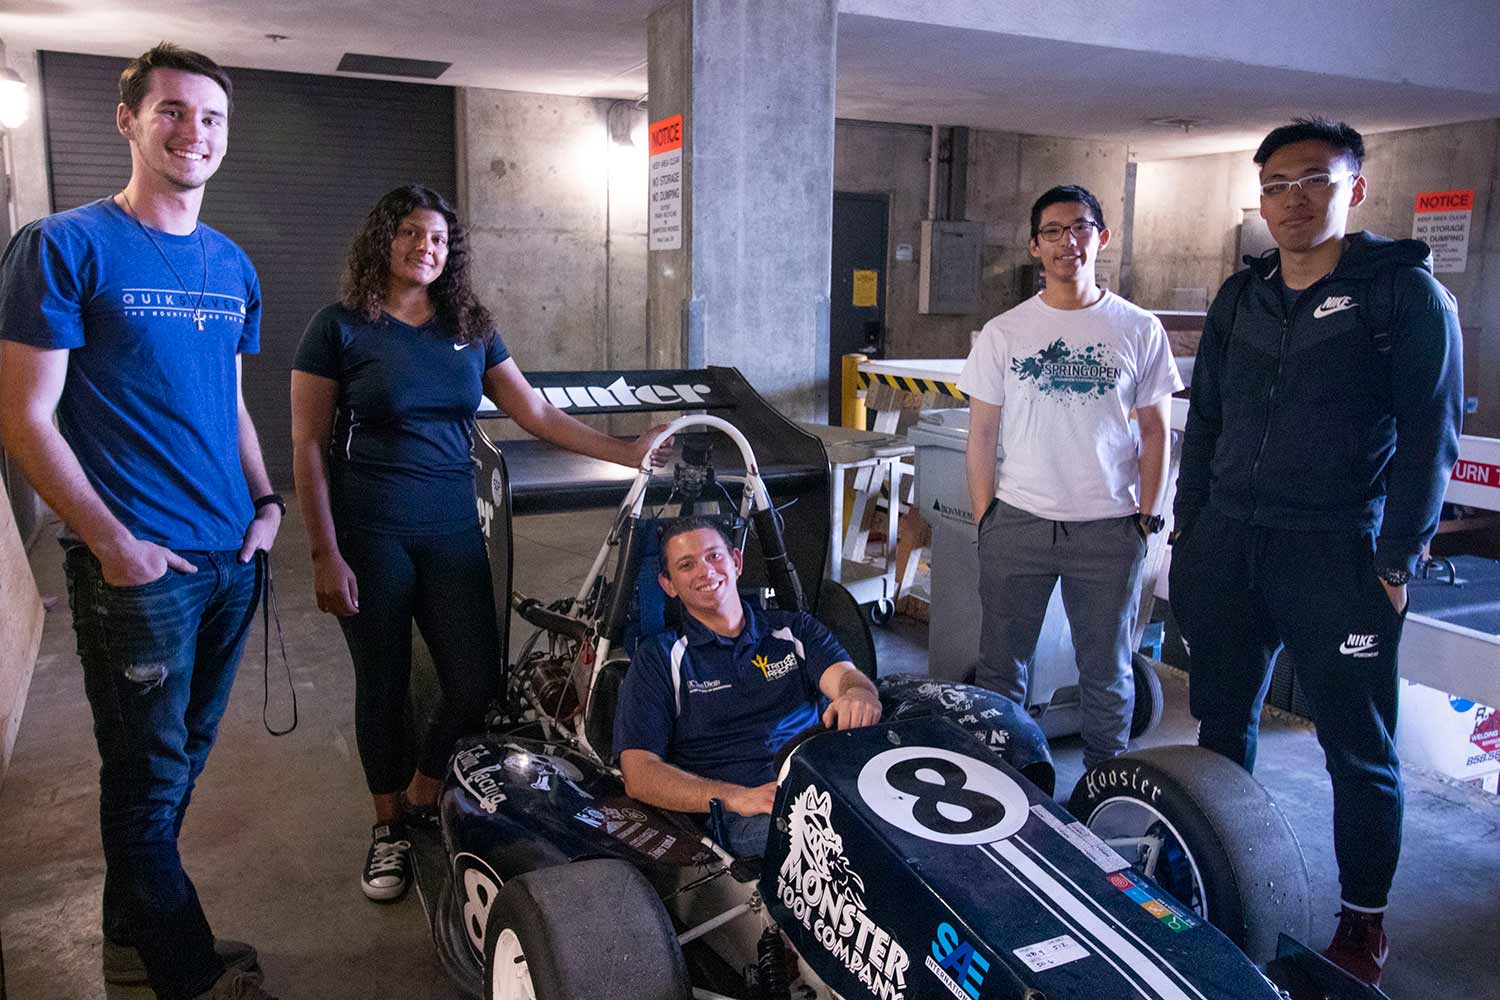 Students from Triton Racing team